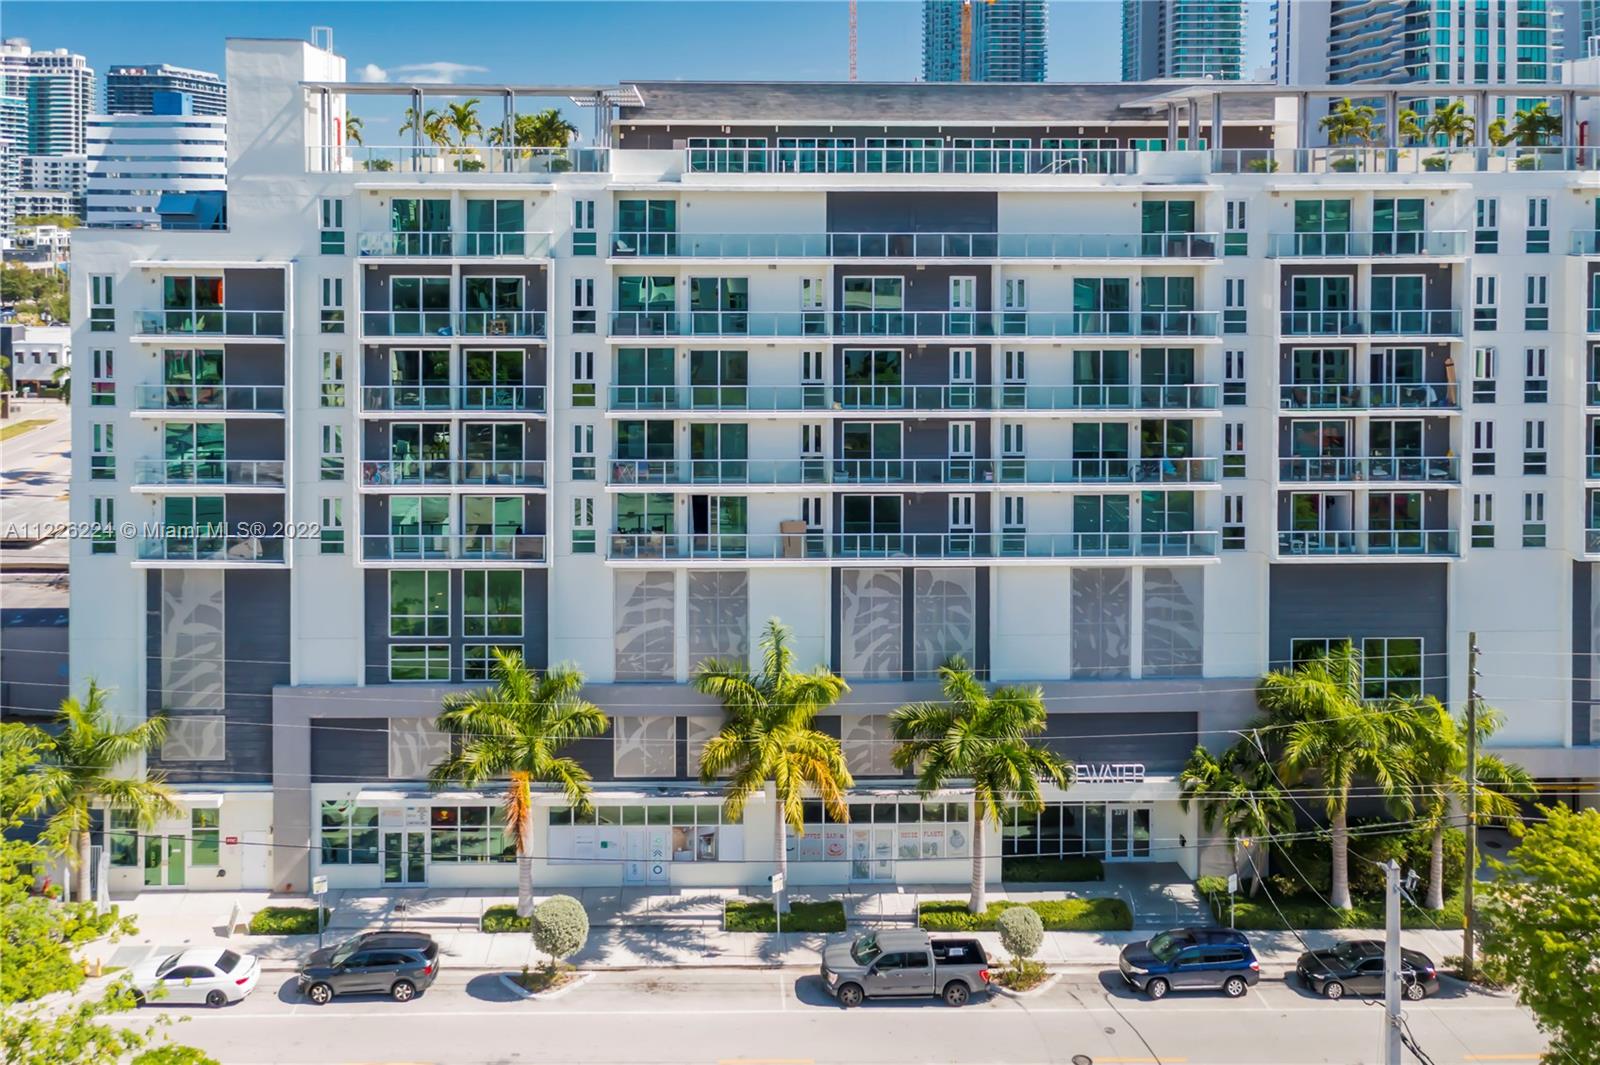 Great 1 bed in 26 Edgewater, one of the newest building on Biscayne Blvd. Excellent Biscayne location next to Wynwood, Midtown and the Design District. The unit has a great kitchen. Building amenities include rooftop pool, clubhouse and gym.